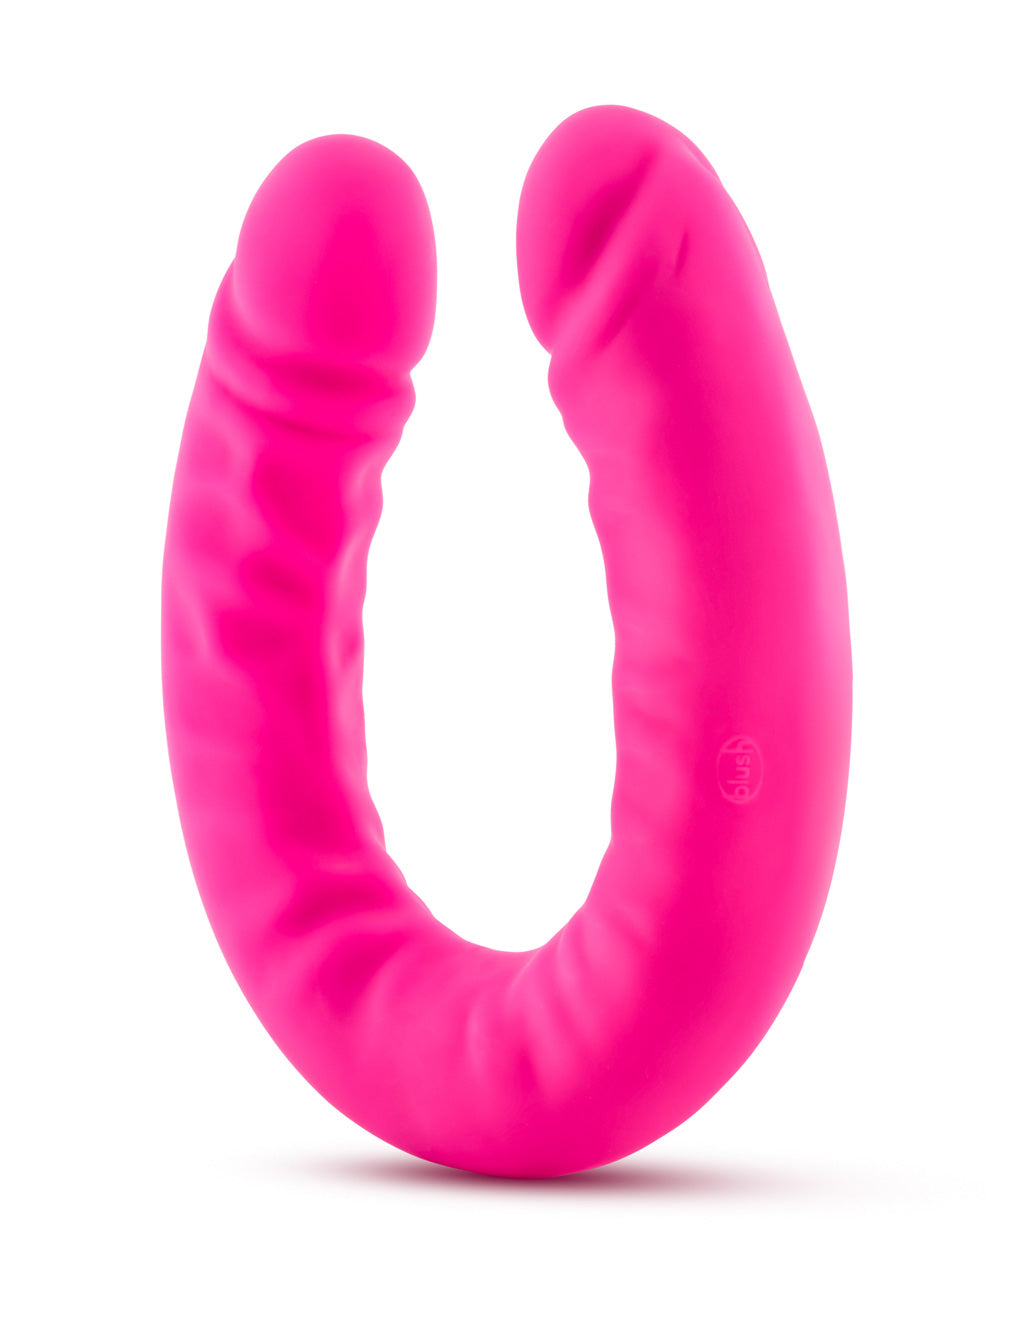 Ruse 18-inch Silicone Double Dong By Blush Novelties Side View